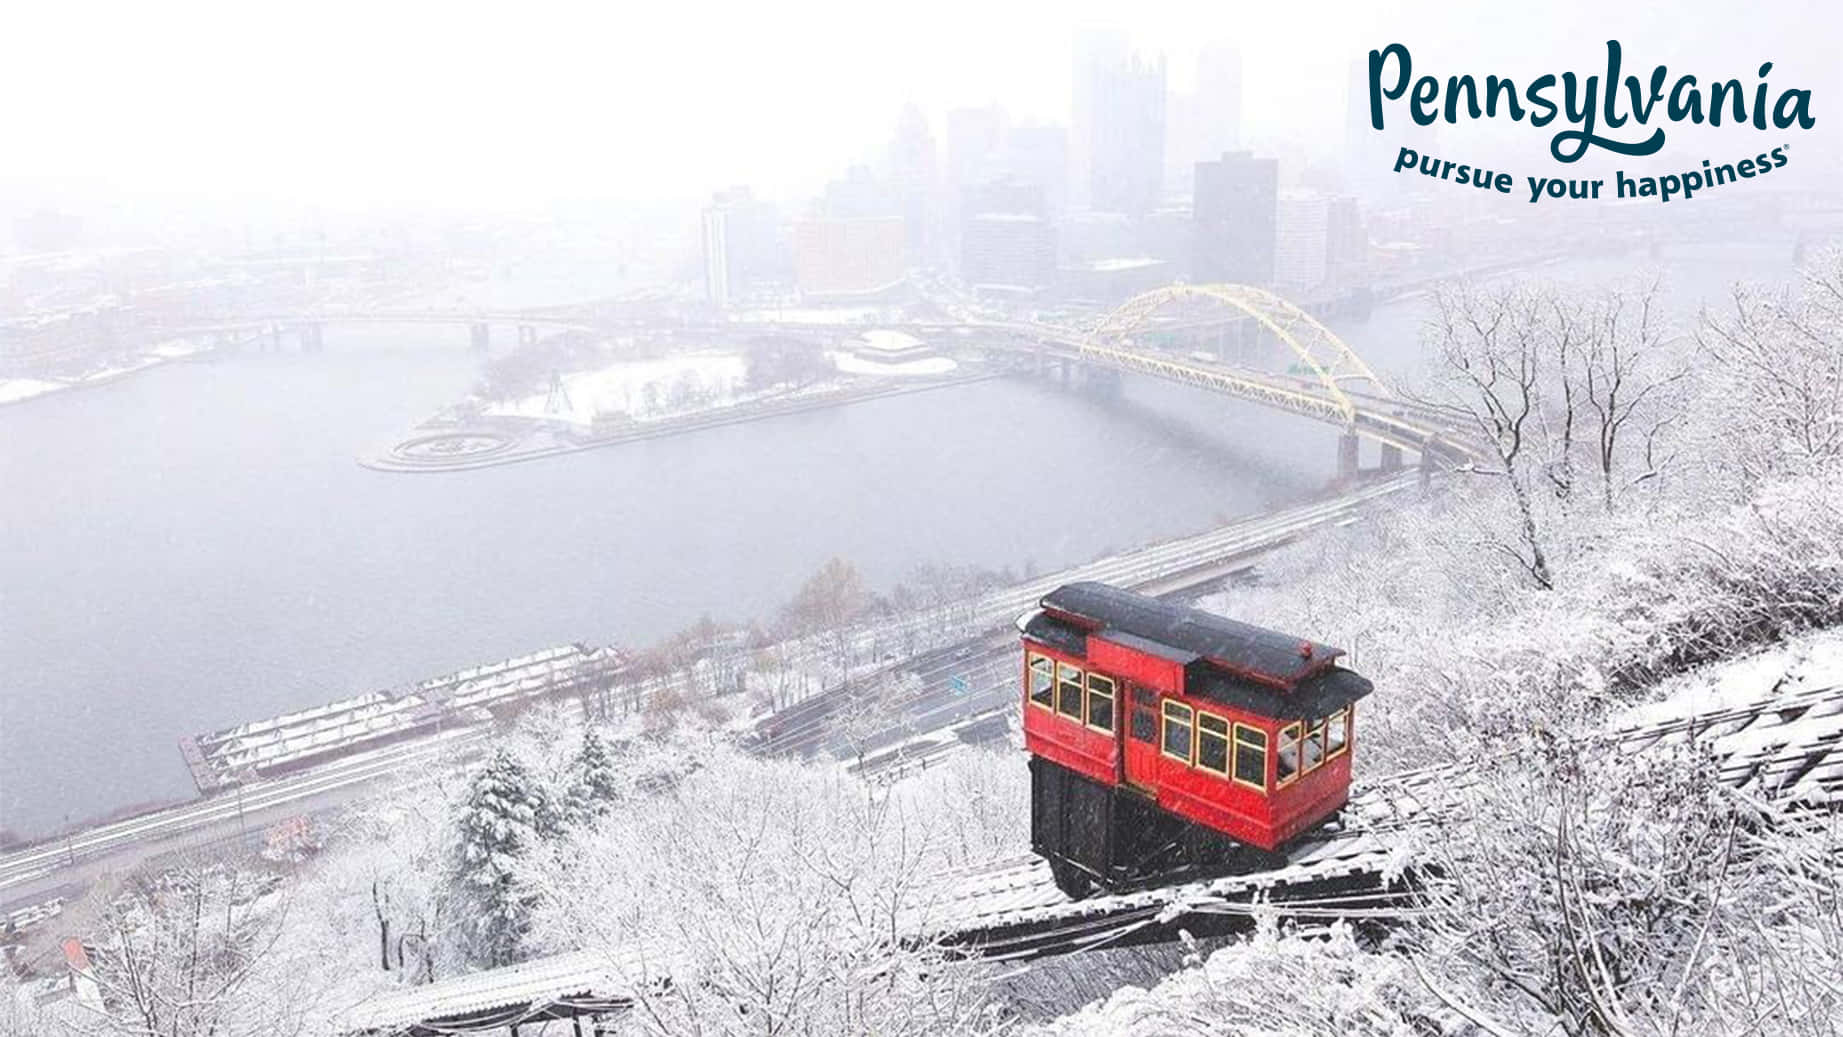 A Red Trolley Car Is On A Snow Covered Hill